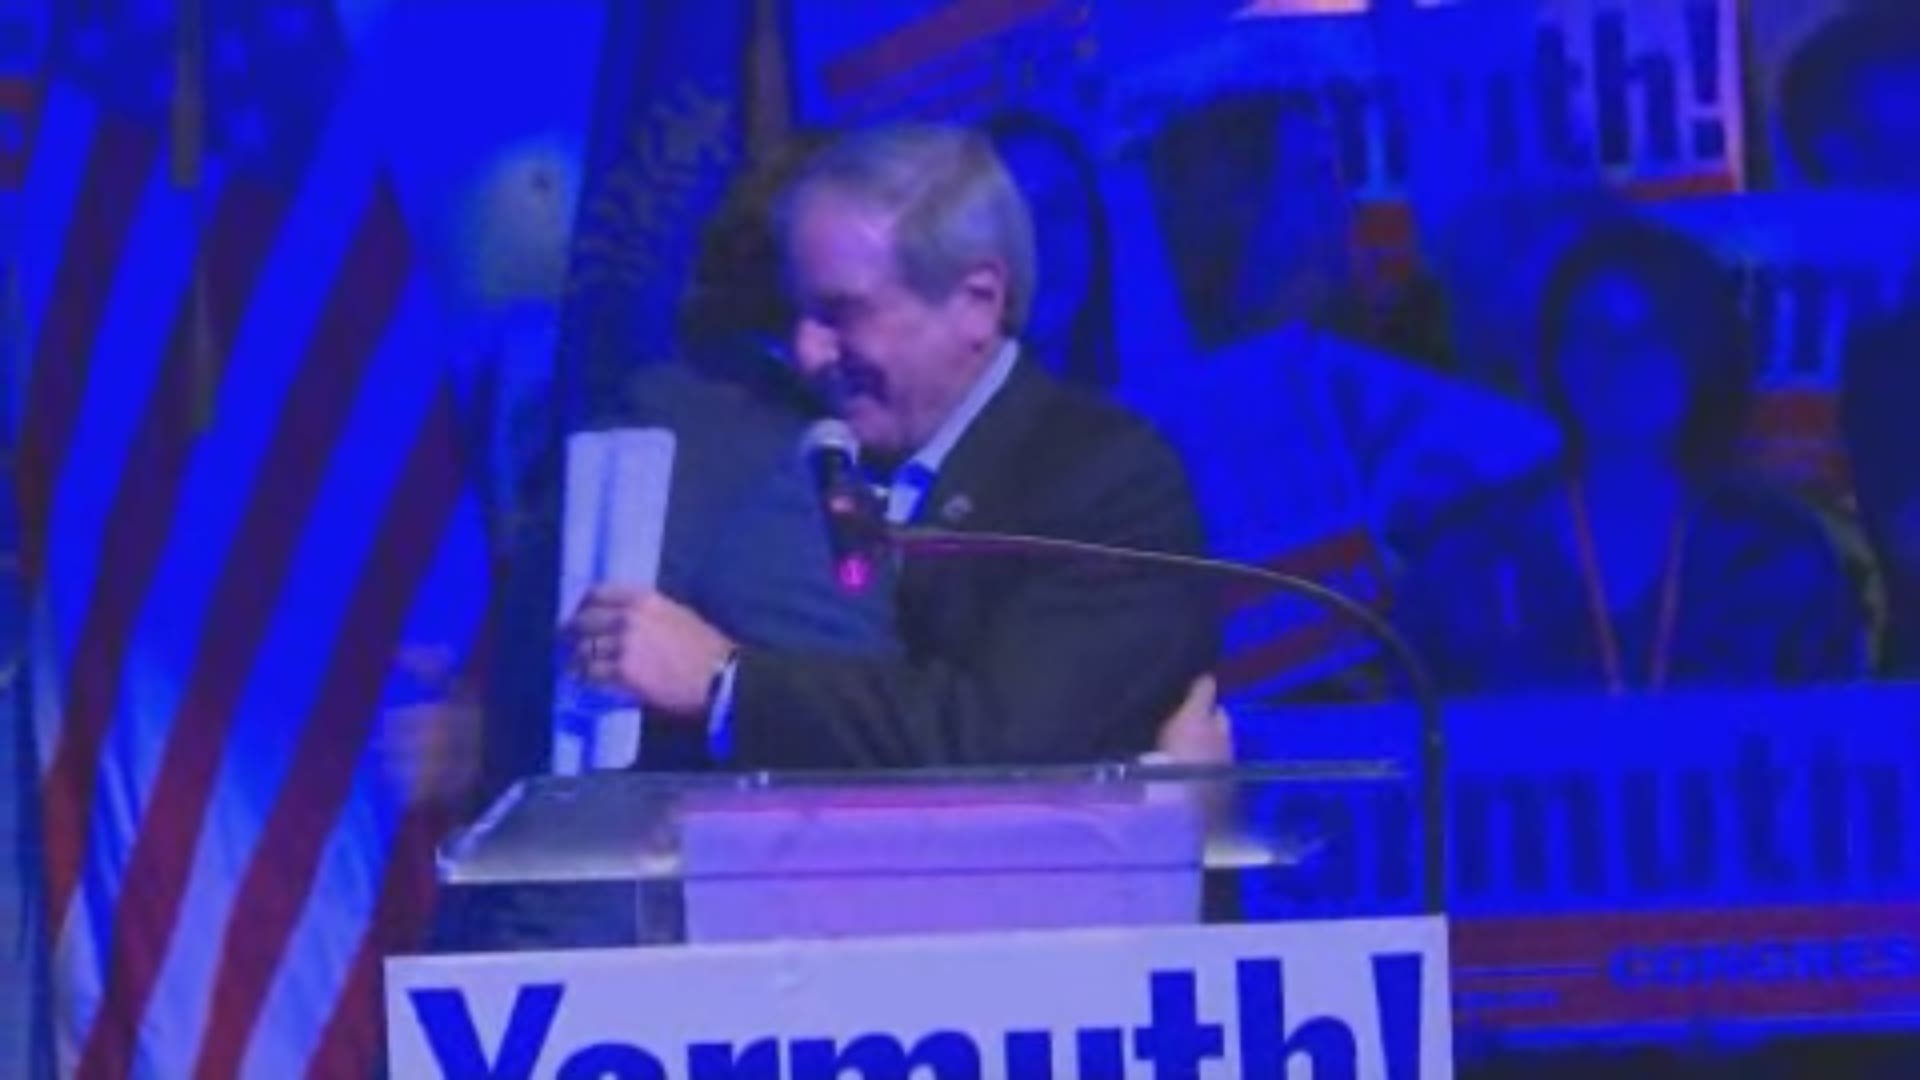 Yarmuth has cruised to re-election victories but faced his most serious challenge from Glisson, who formerly served as Kentucky's top-ranking health official in Republican Gov. Matt Bevin's administration.